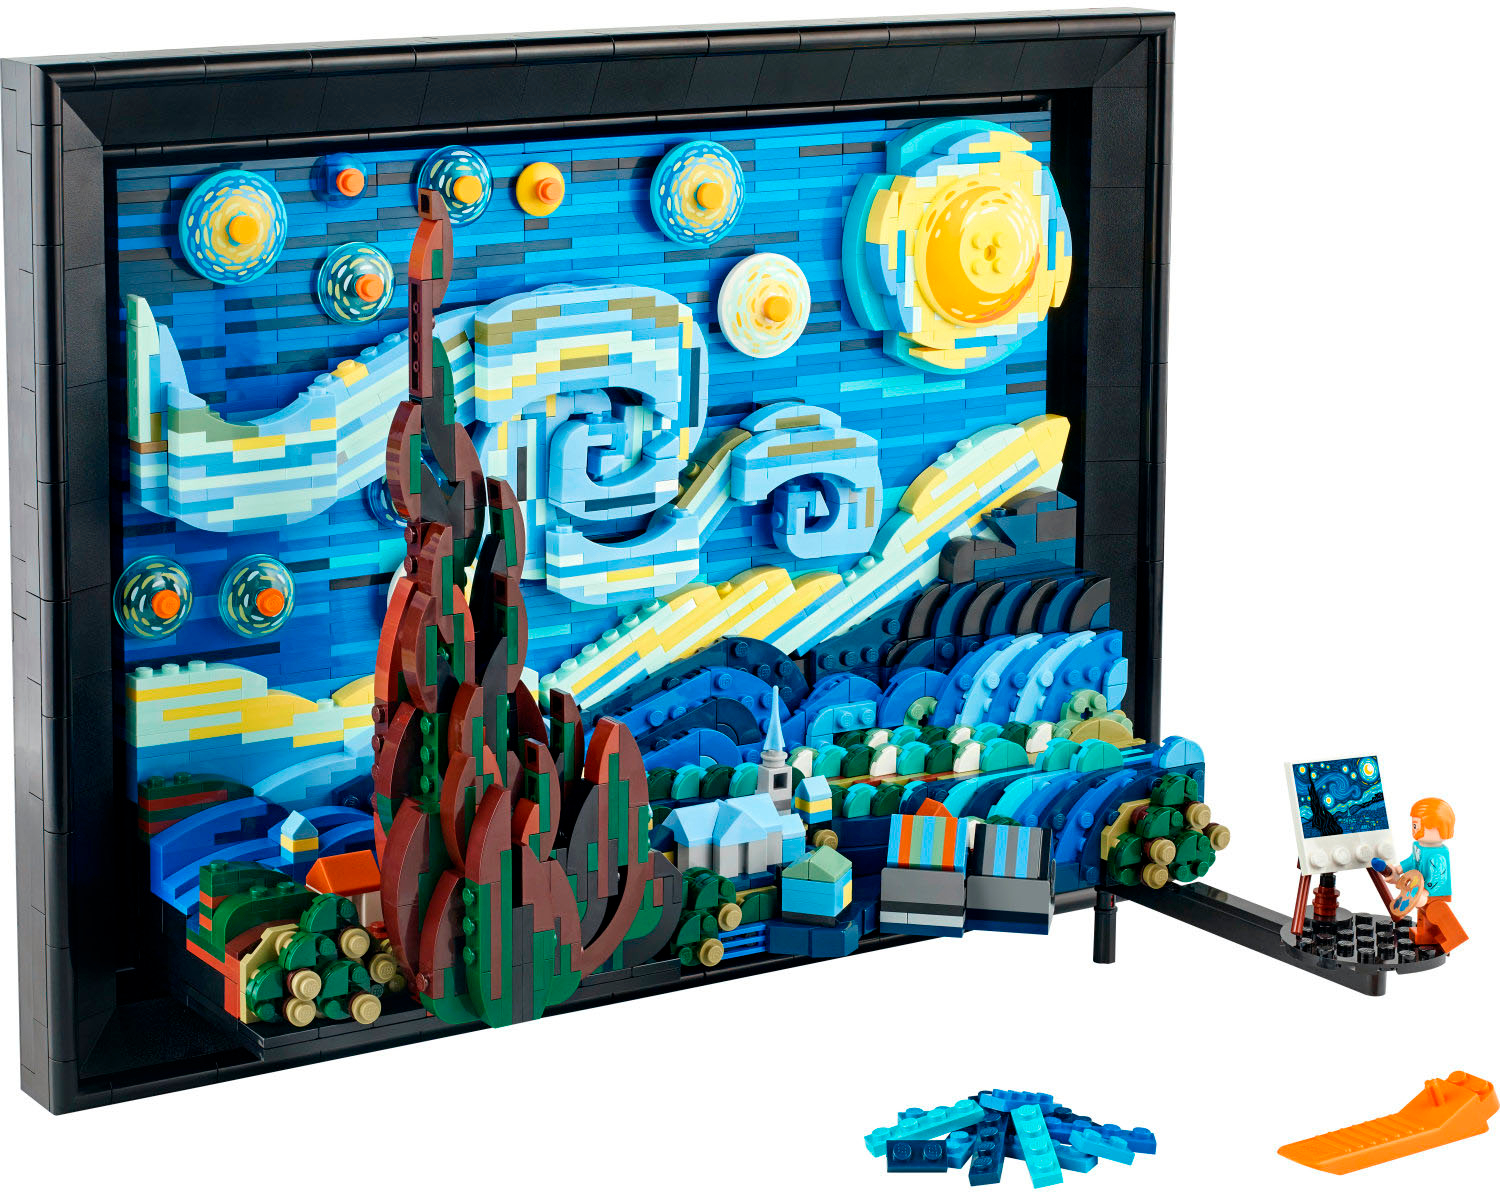 Left View: LEGO - Ideas Vincent van Gogh  The Starry Night 21333 Toy Building Kit (2,316 Pieces)